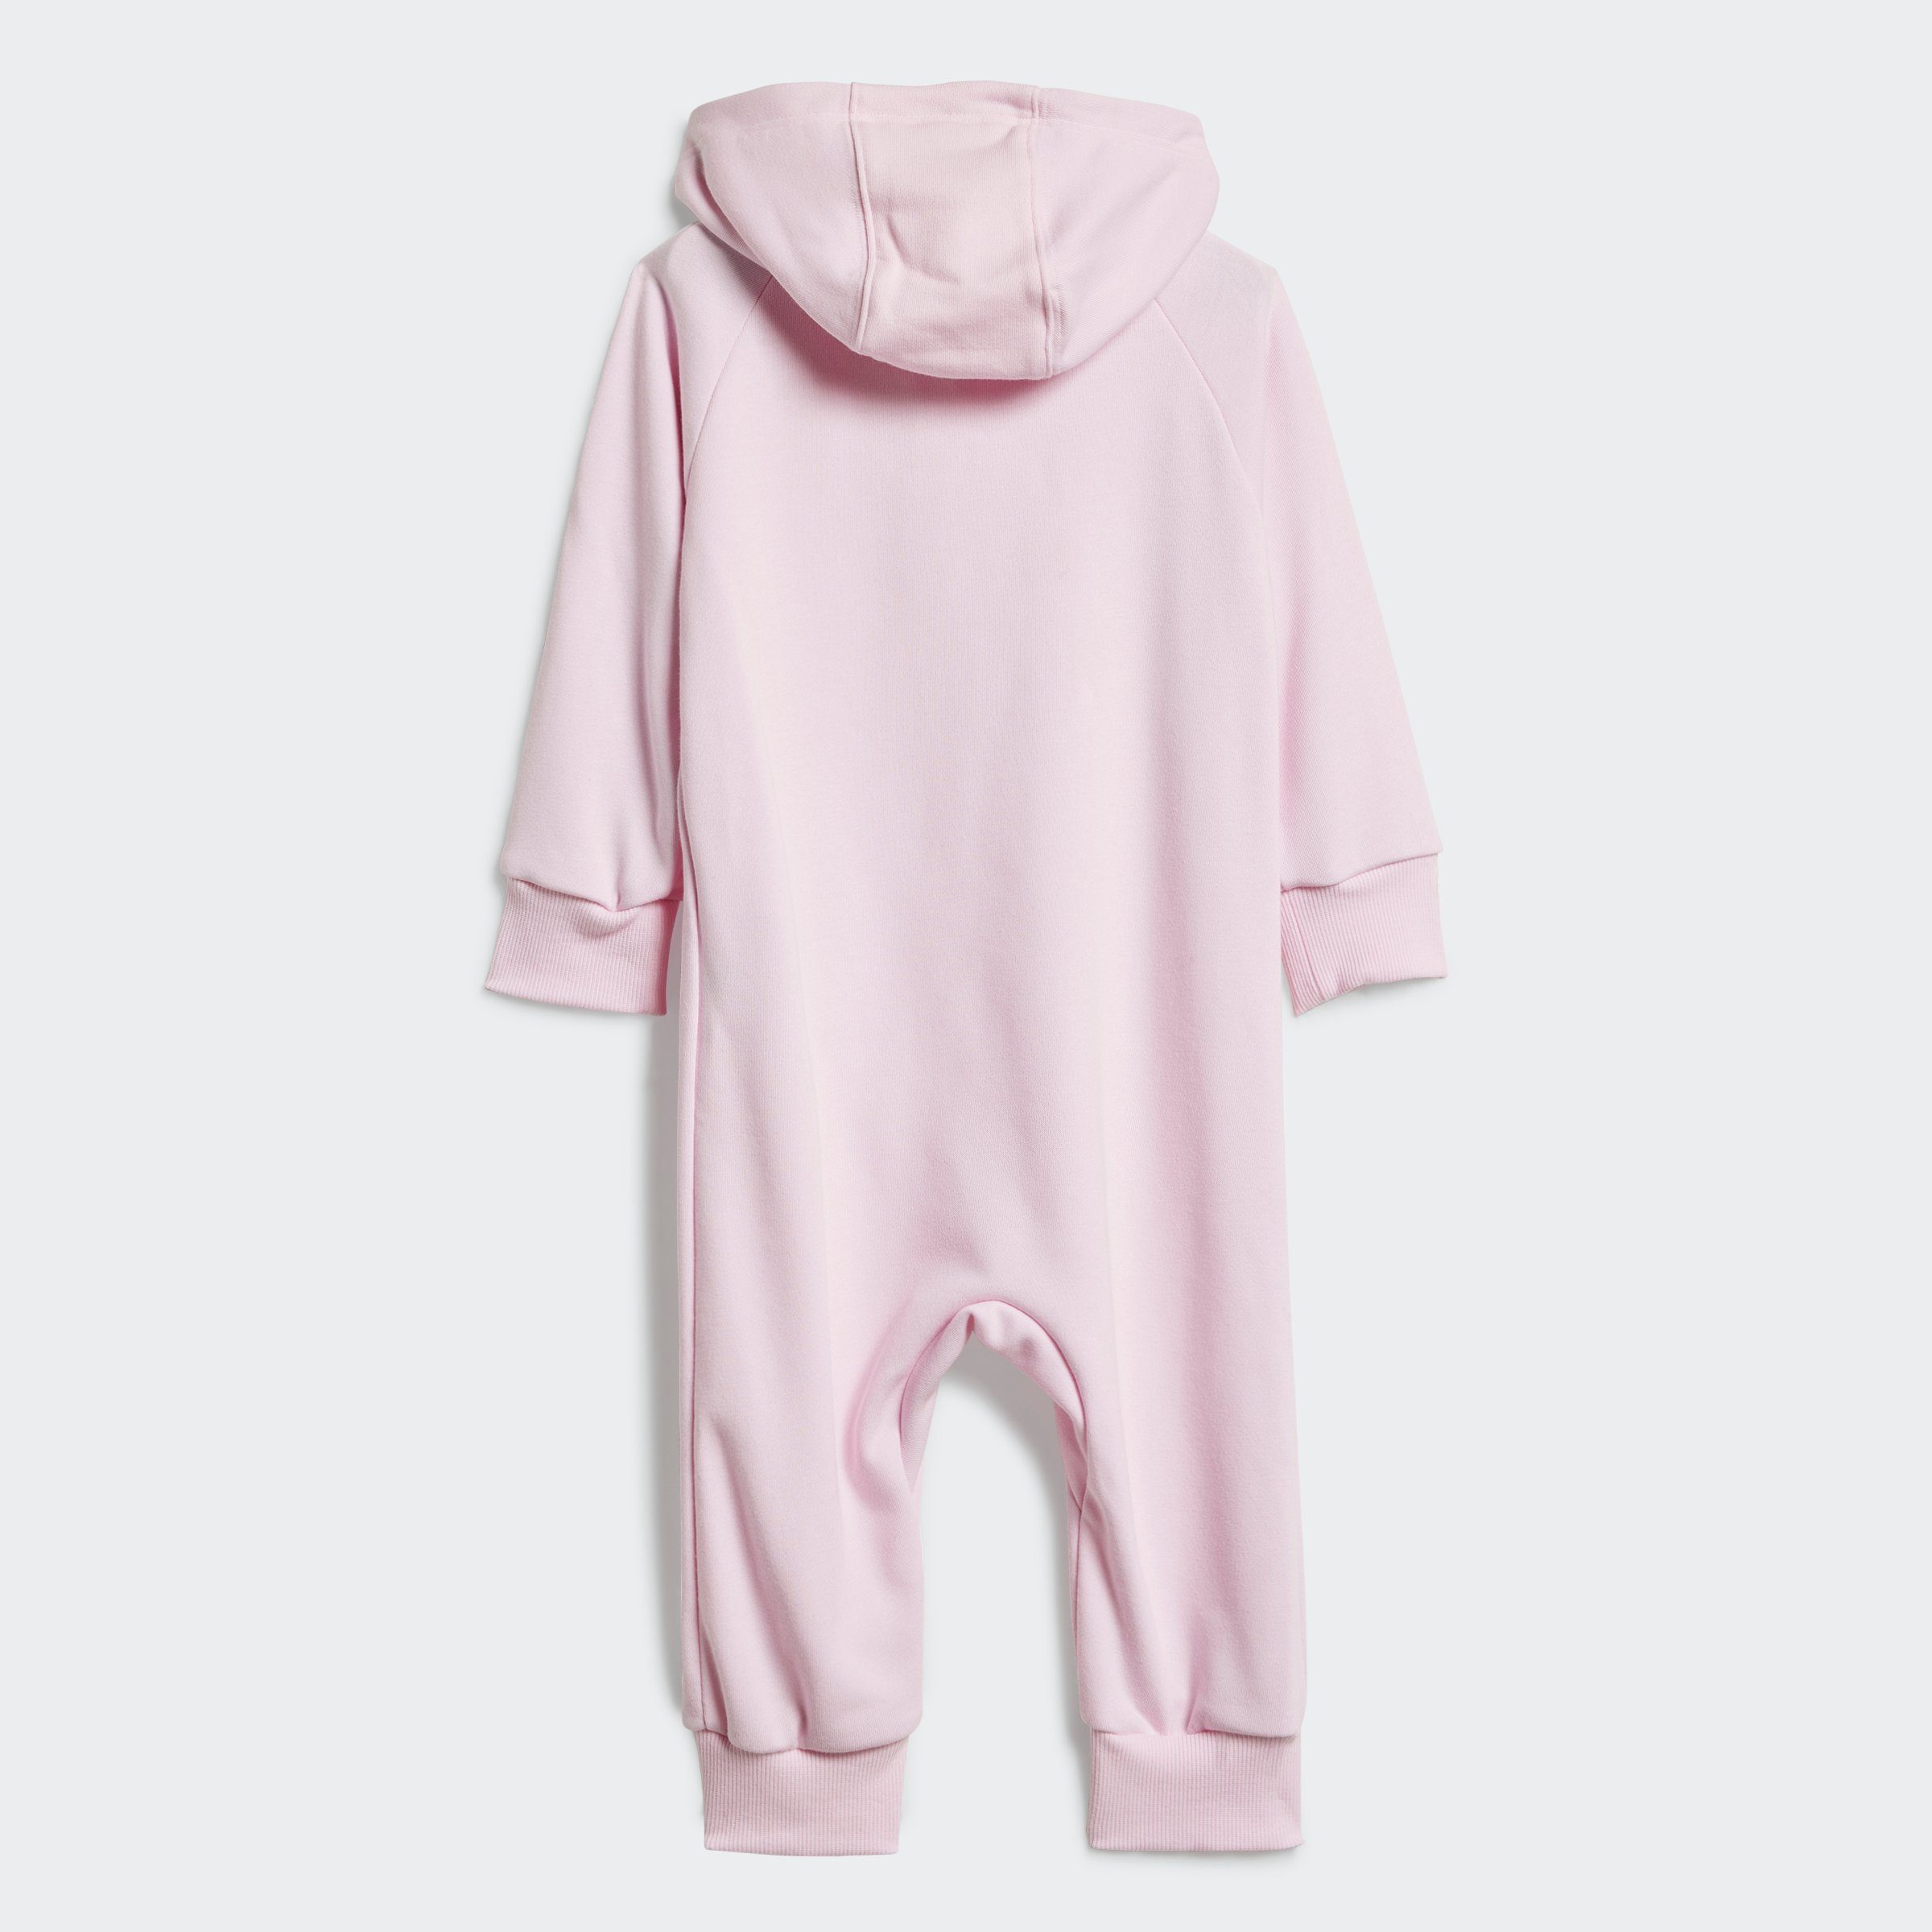 adidas Sportswear ONESIE FT / 3S I Overall White Clear Pink